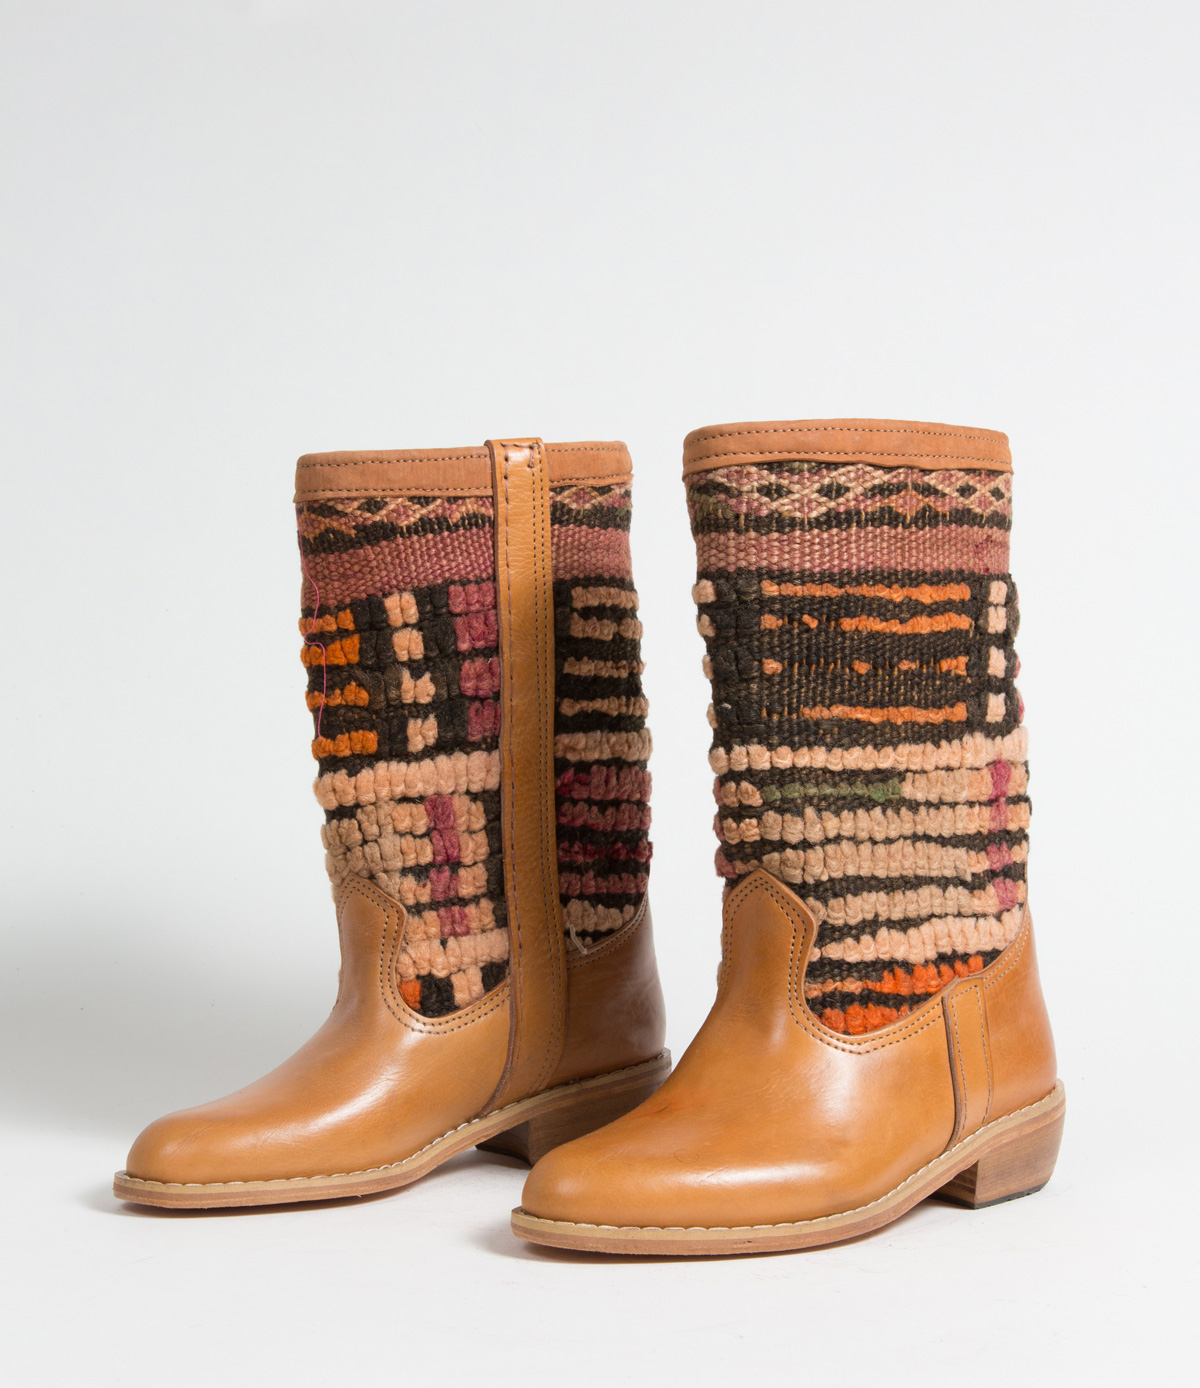 Bottes Kilim cuir mababouche artisanales (Réf. GL1-36)